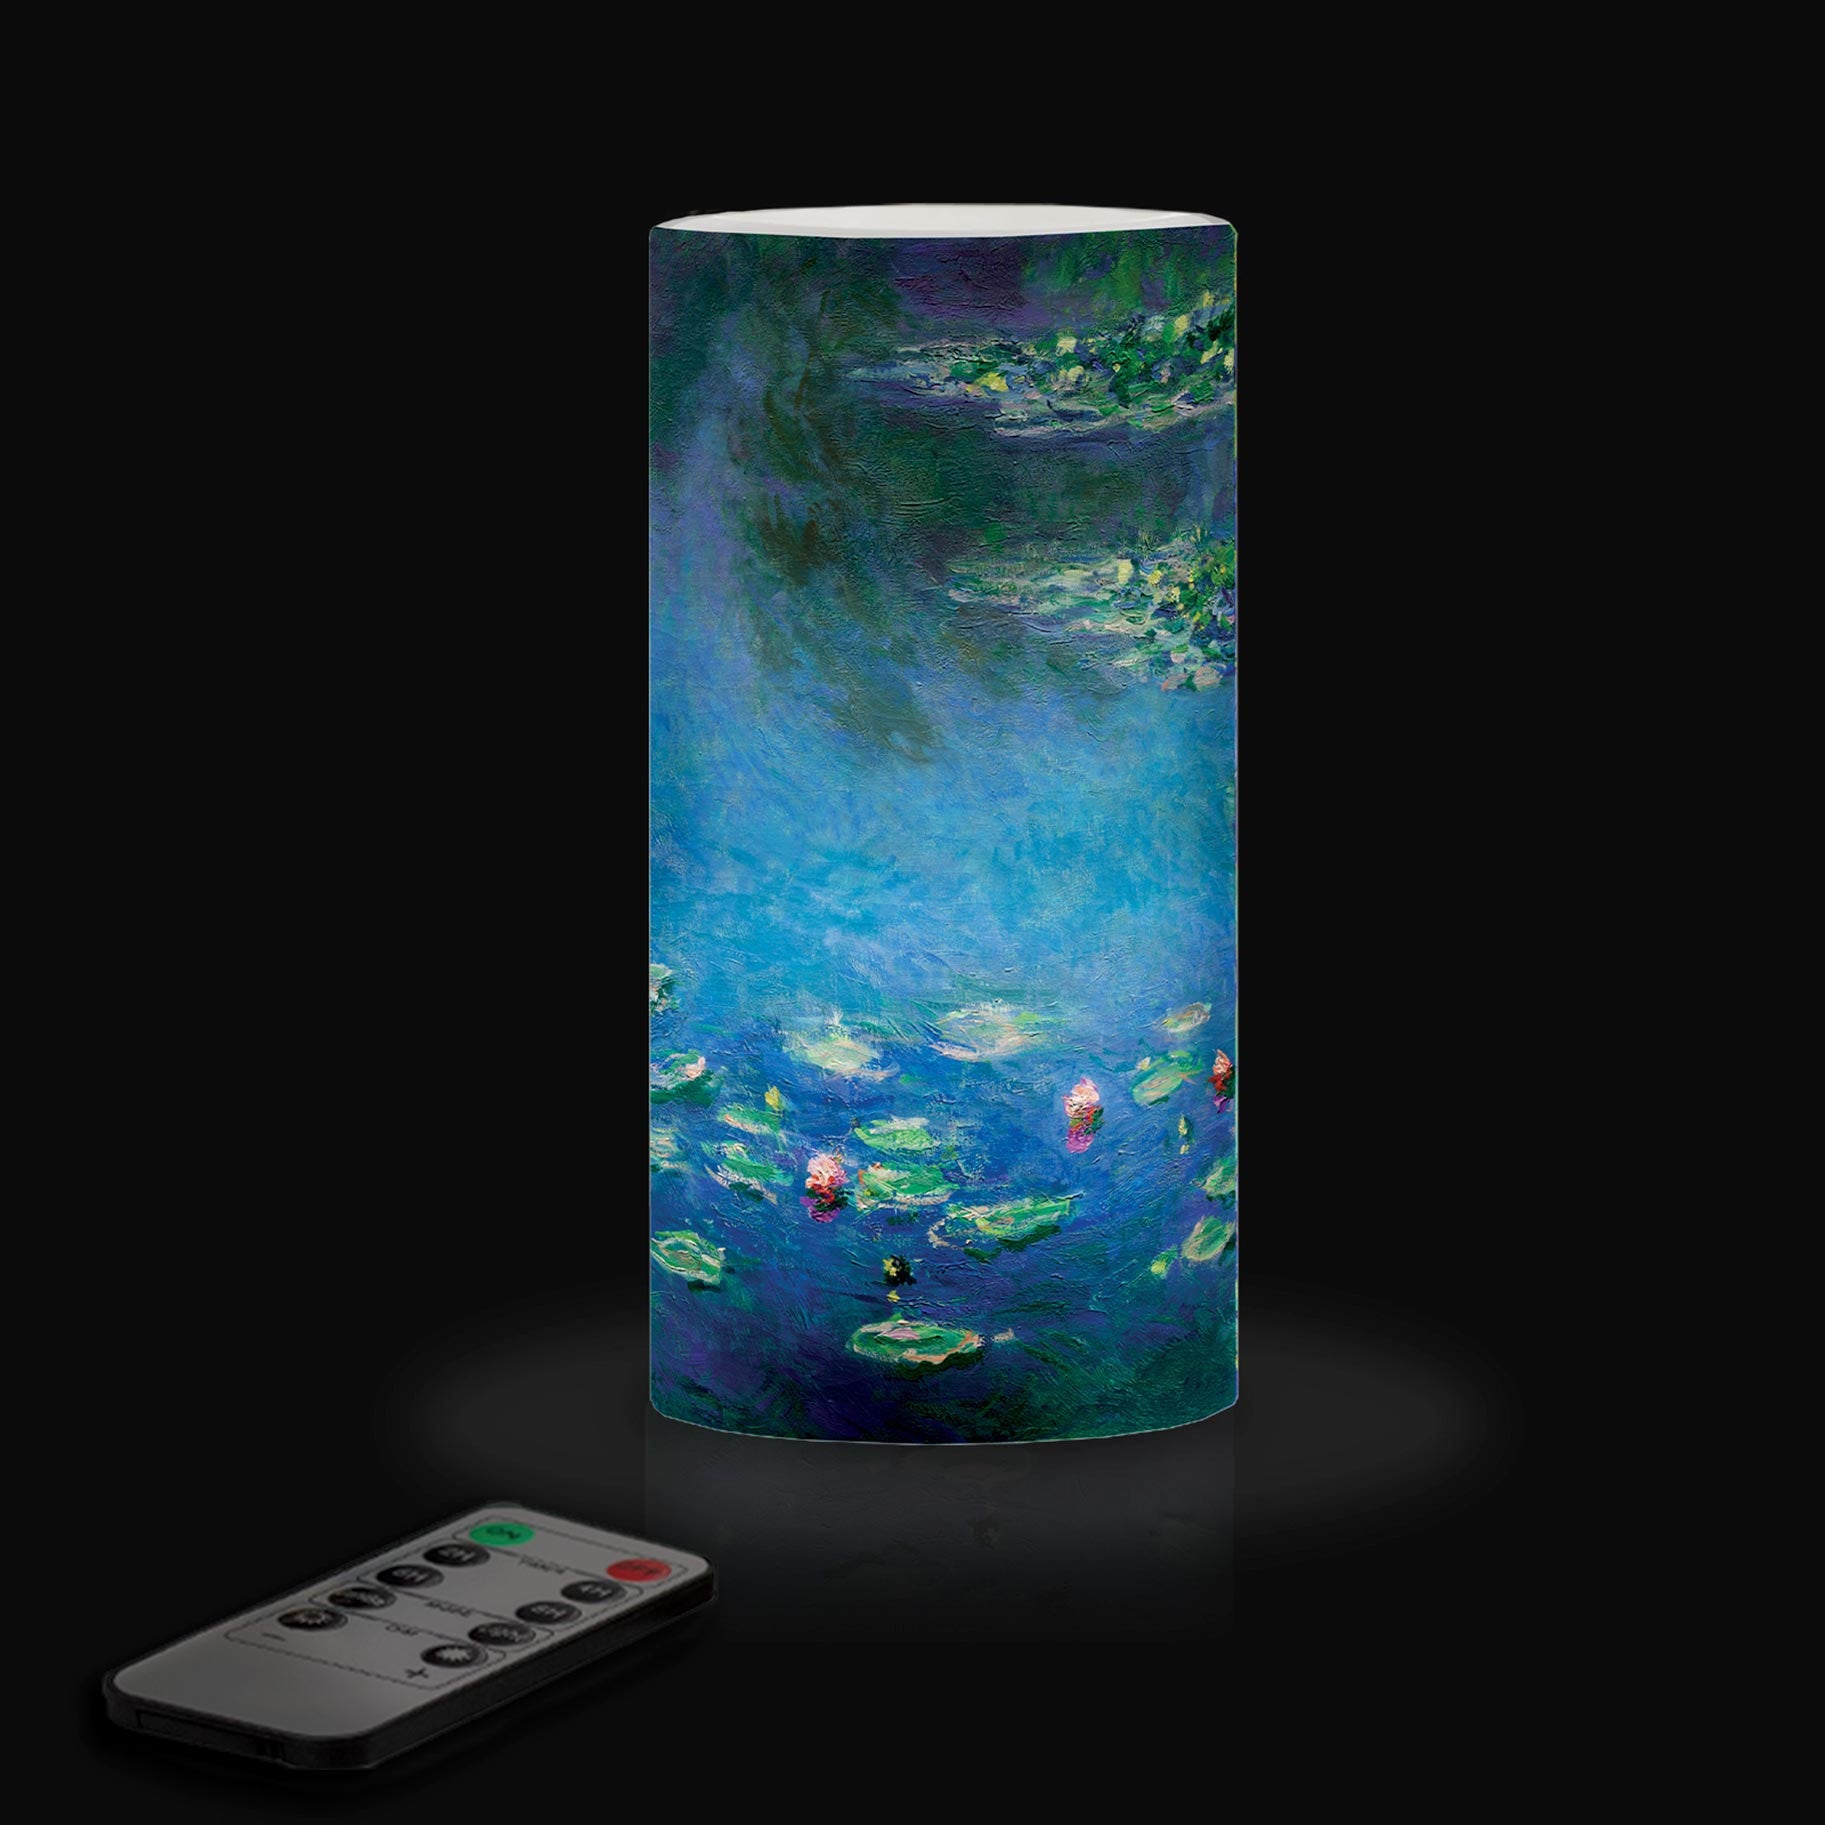 Monet Water Lilies 6" LED Real Wax Candle with Remote